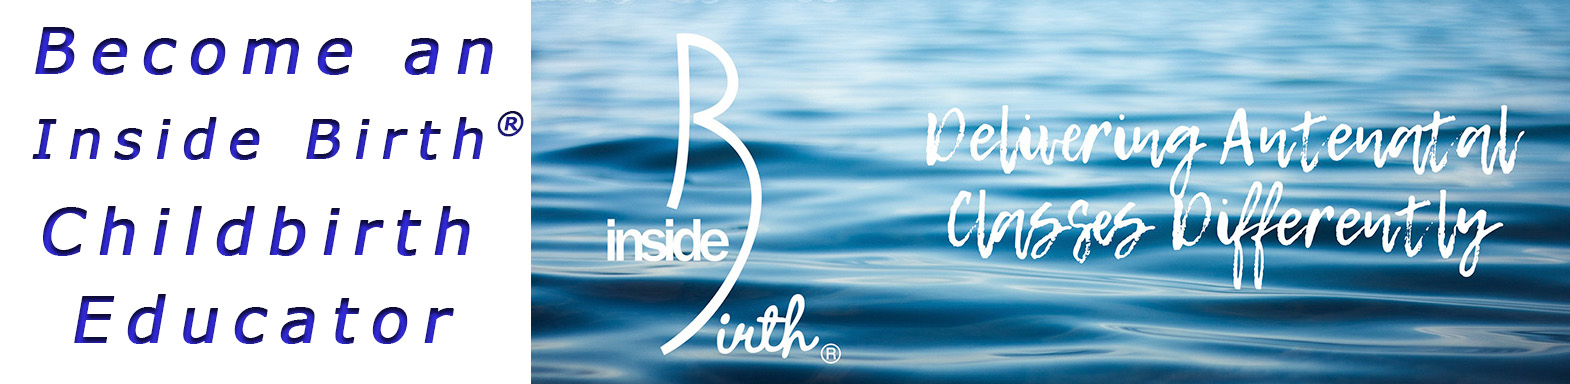 Inside Birth - Become a childbirth educator with Inside Birth - Delivering Antenatal Classes Differently